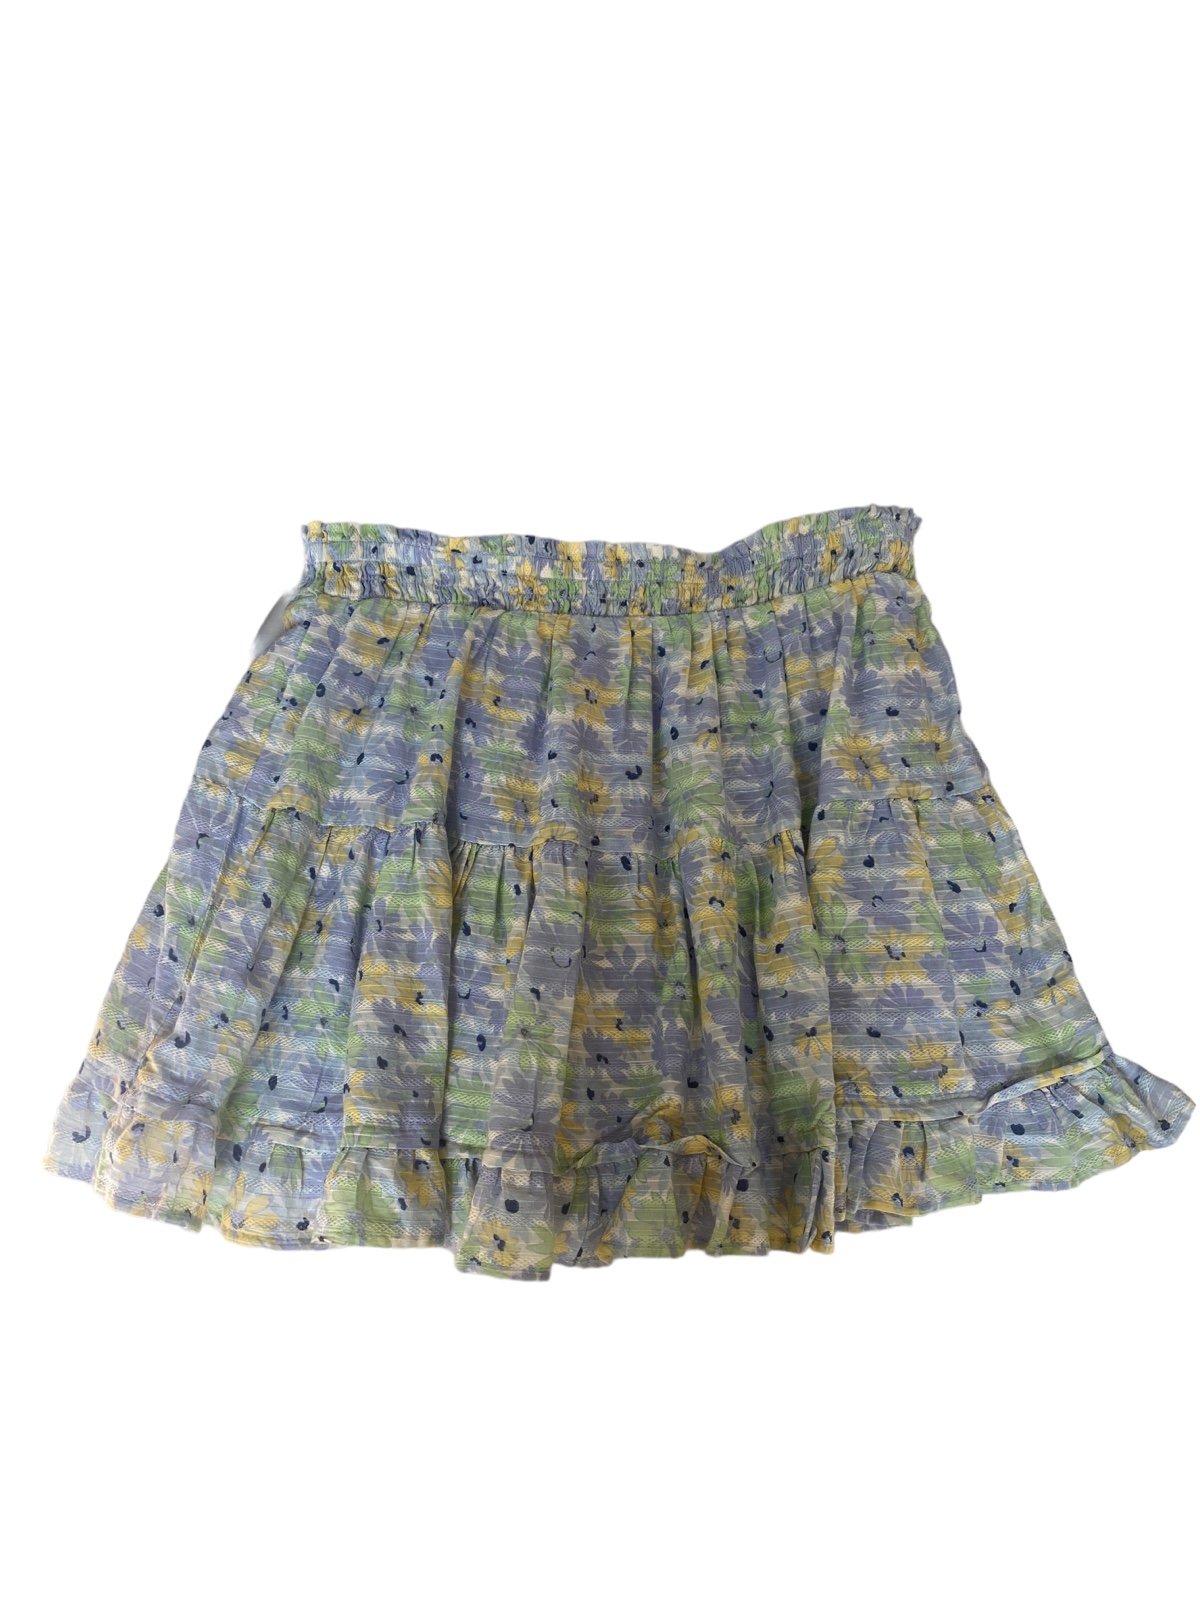 Simple TRUE CRAFT Junior´s Pastel Lilac Floral Tiered Skirt Size: L hDm3u3T9T Factory Price